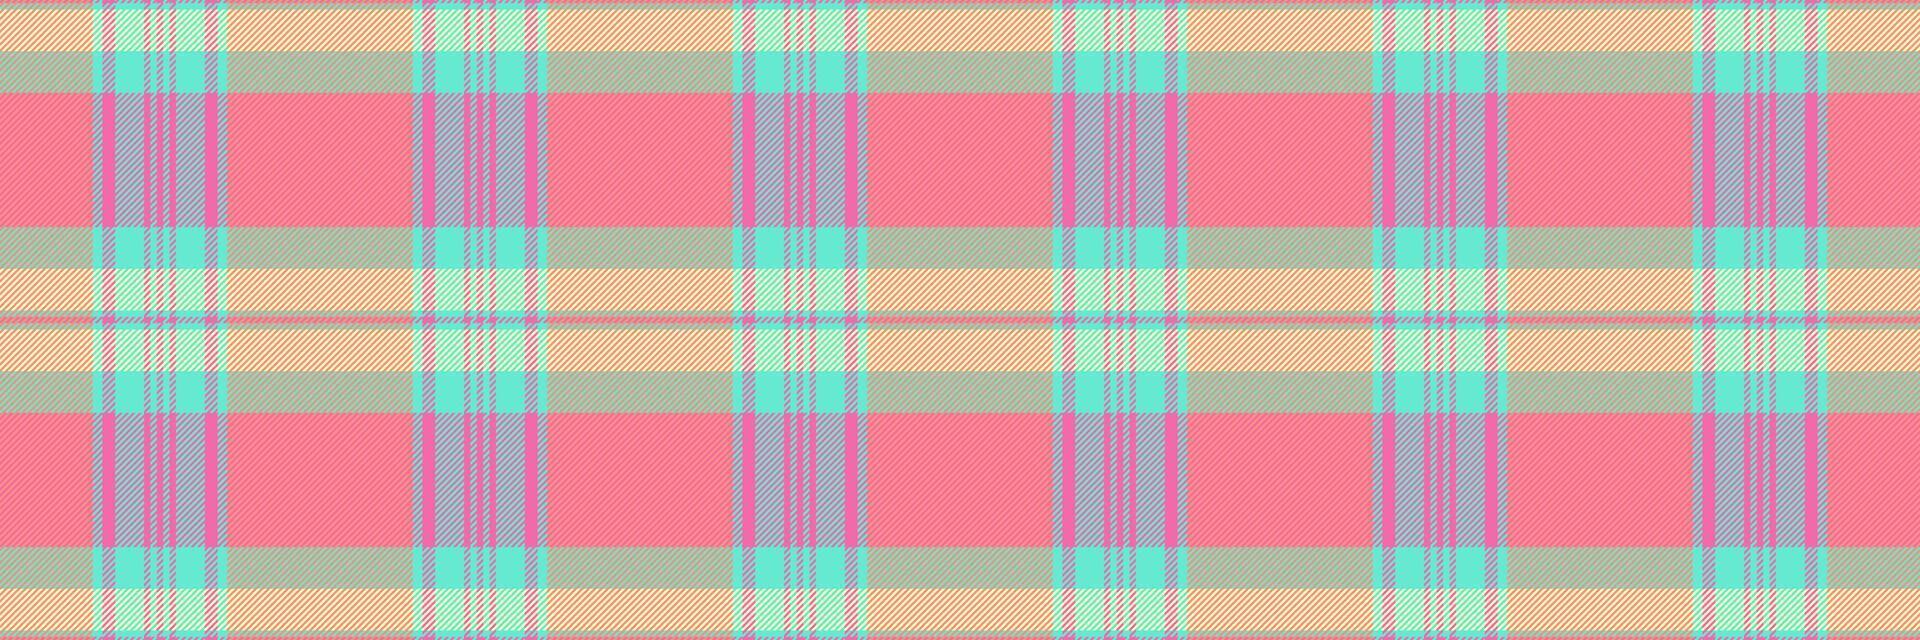 Installing texture fabric tartan, mesh pattern plaid vector. Crossed check background seamless textile in red and pink colors. vector